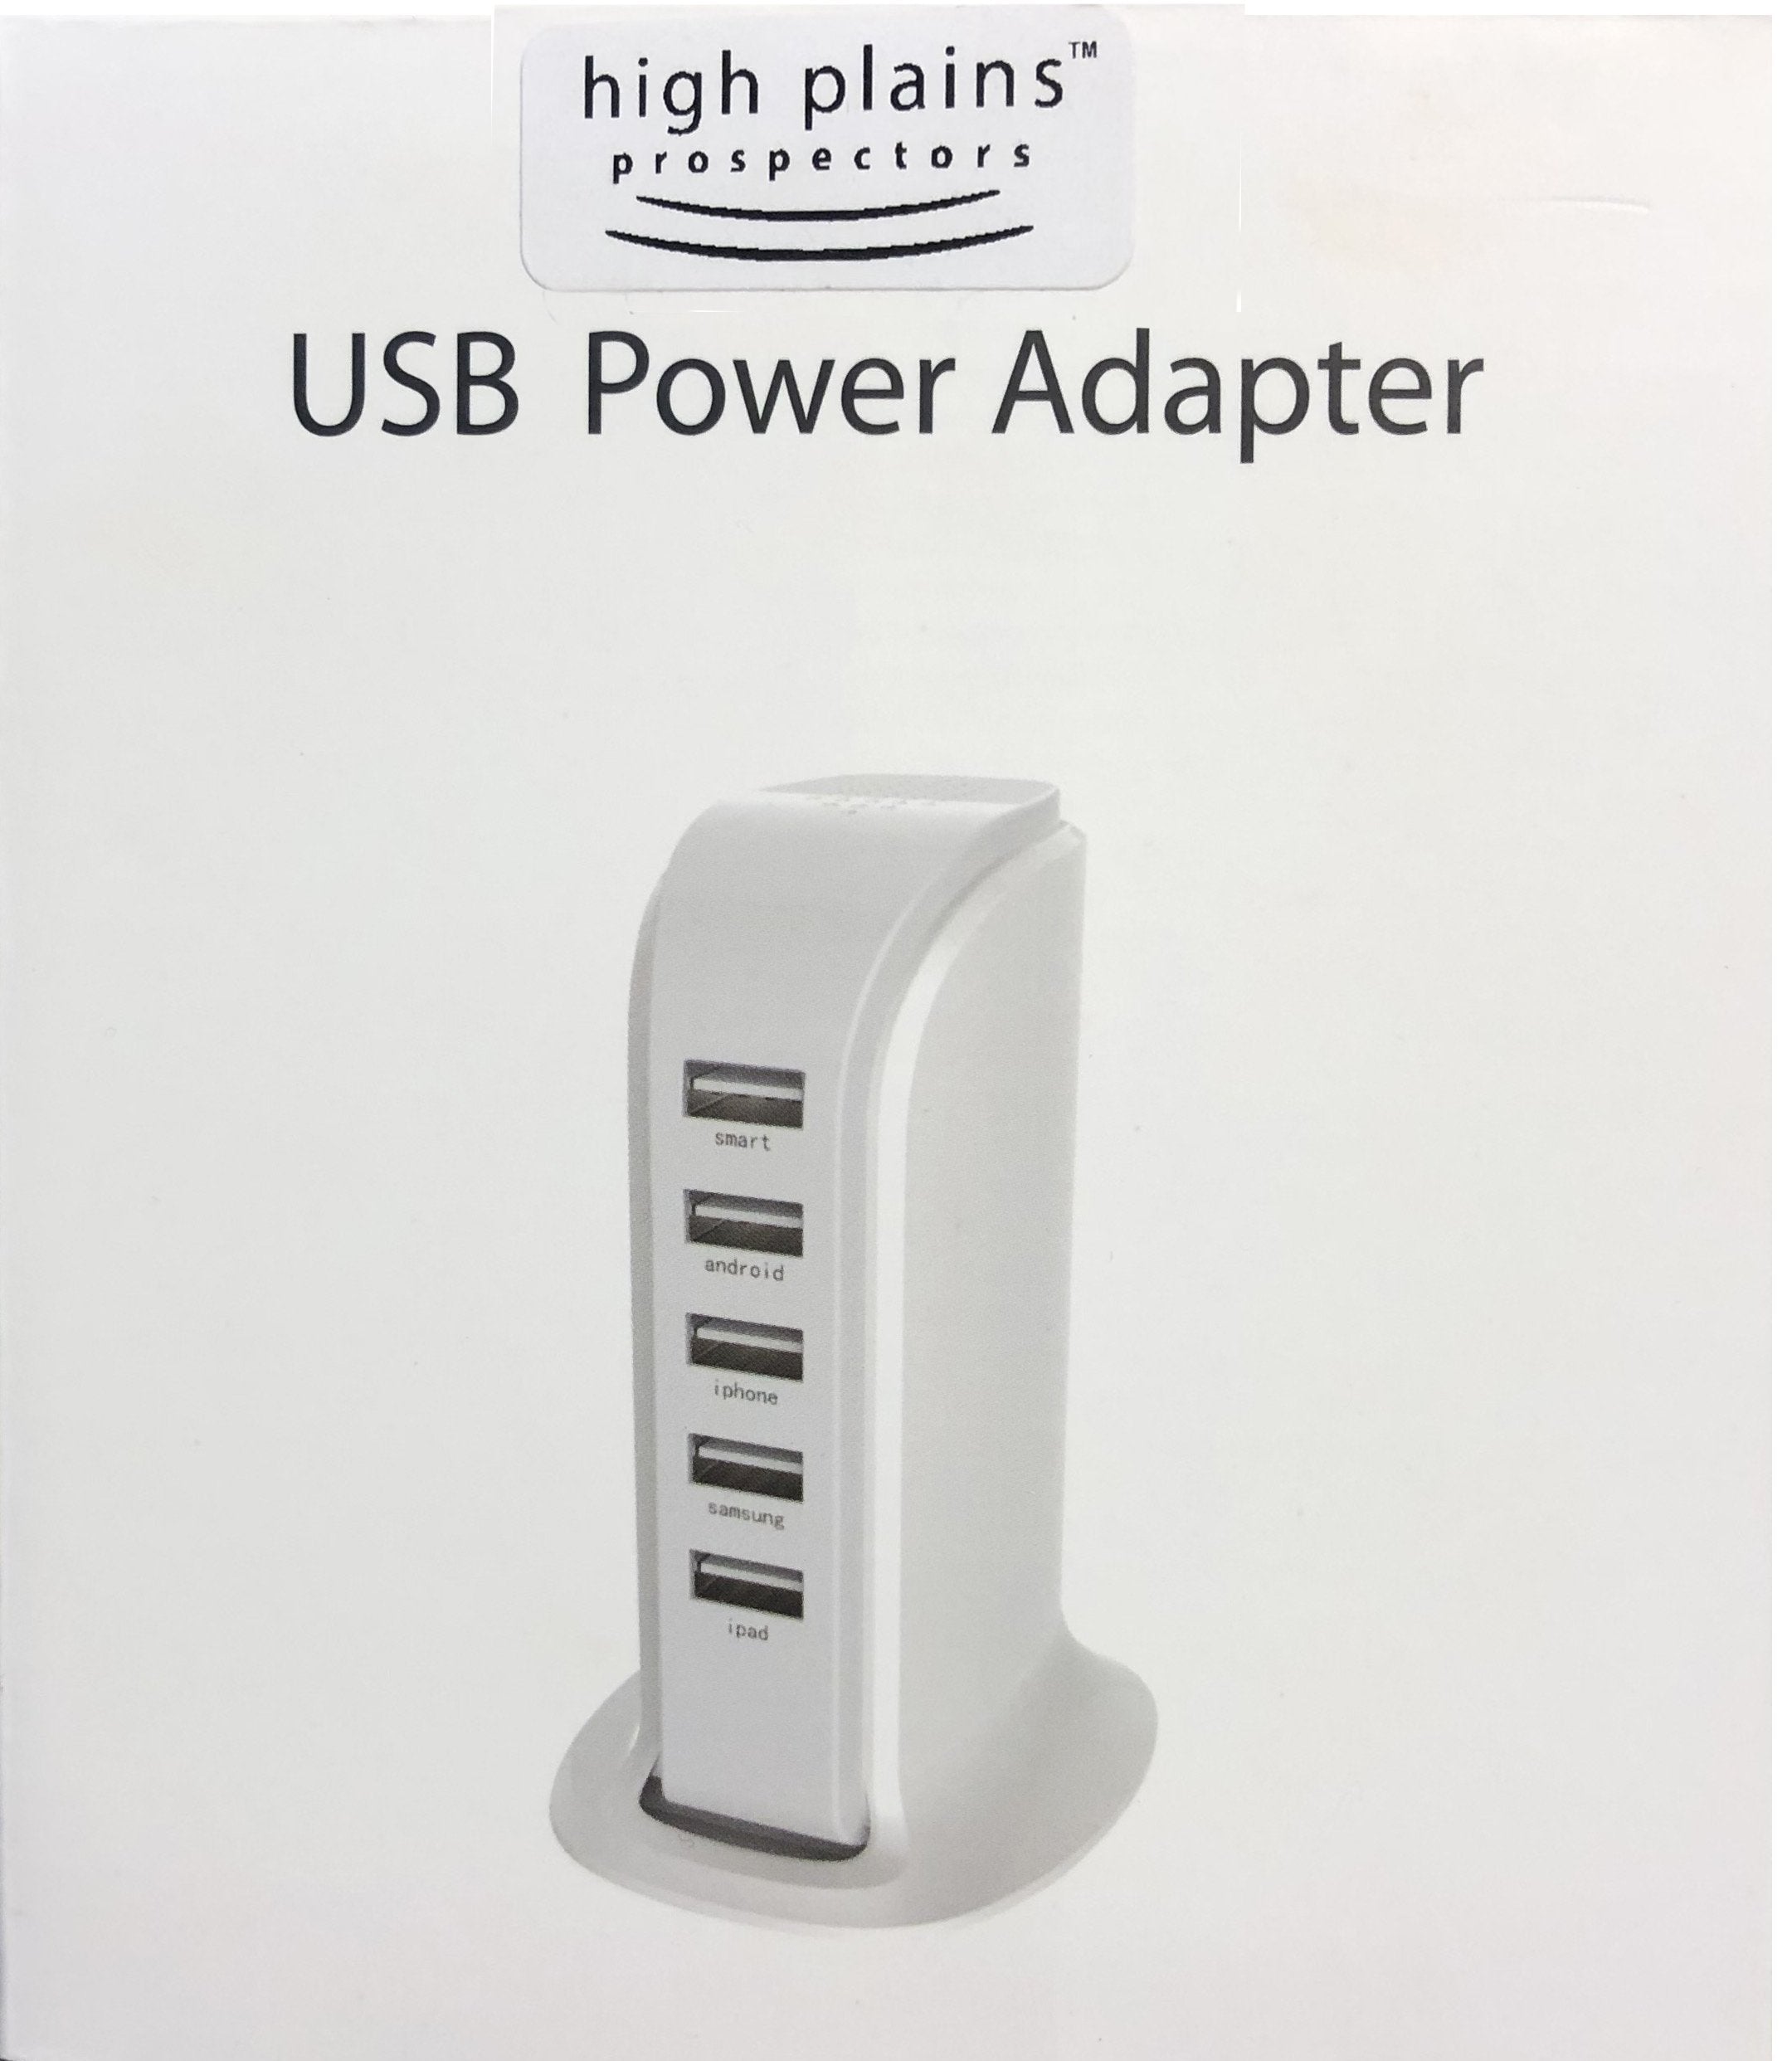 USB Battery and 5-Port USB Charger - 5 Volt, 4 Amp Output